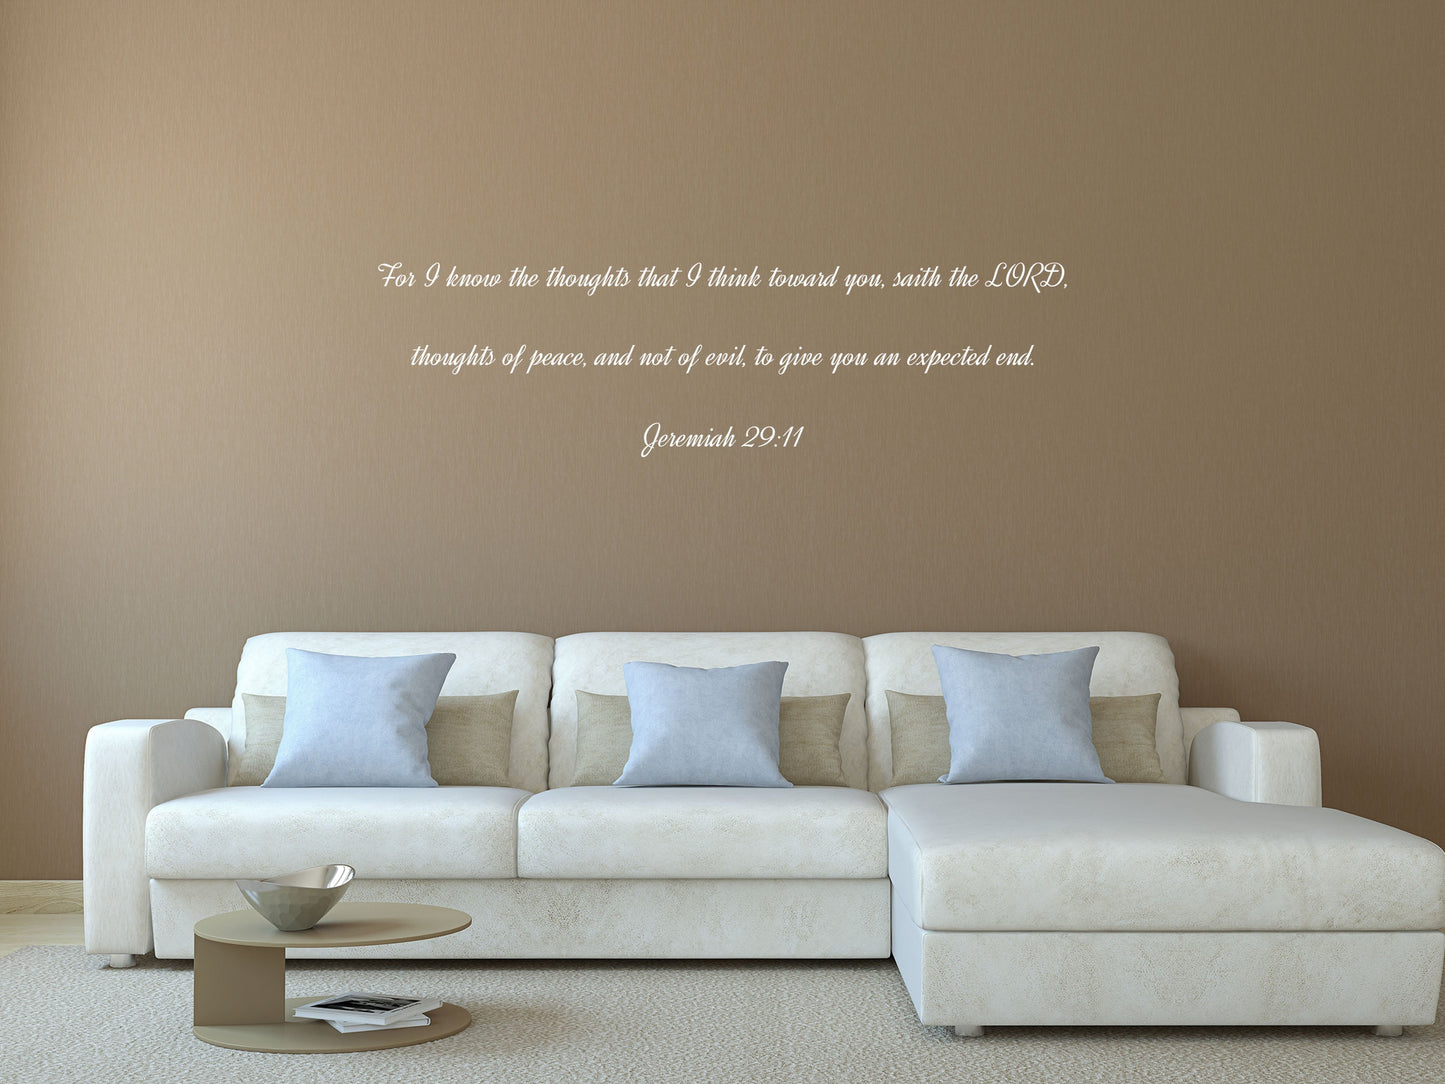 Jeremiah 29:11 Wall Inspirational Decal Quote Vinyl Wall Decal Inspirational Wall Signs 